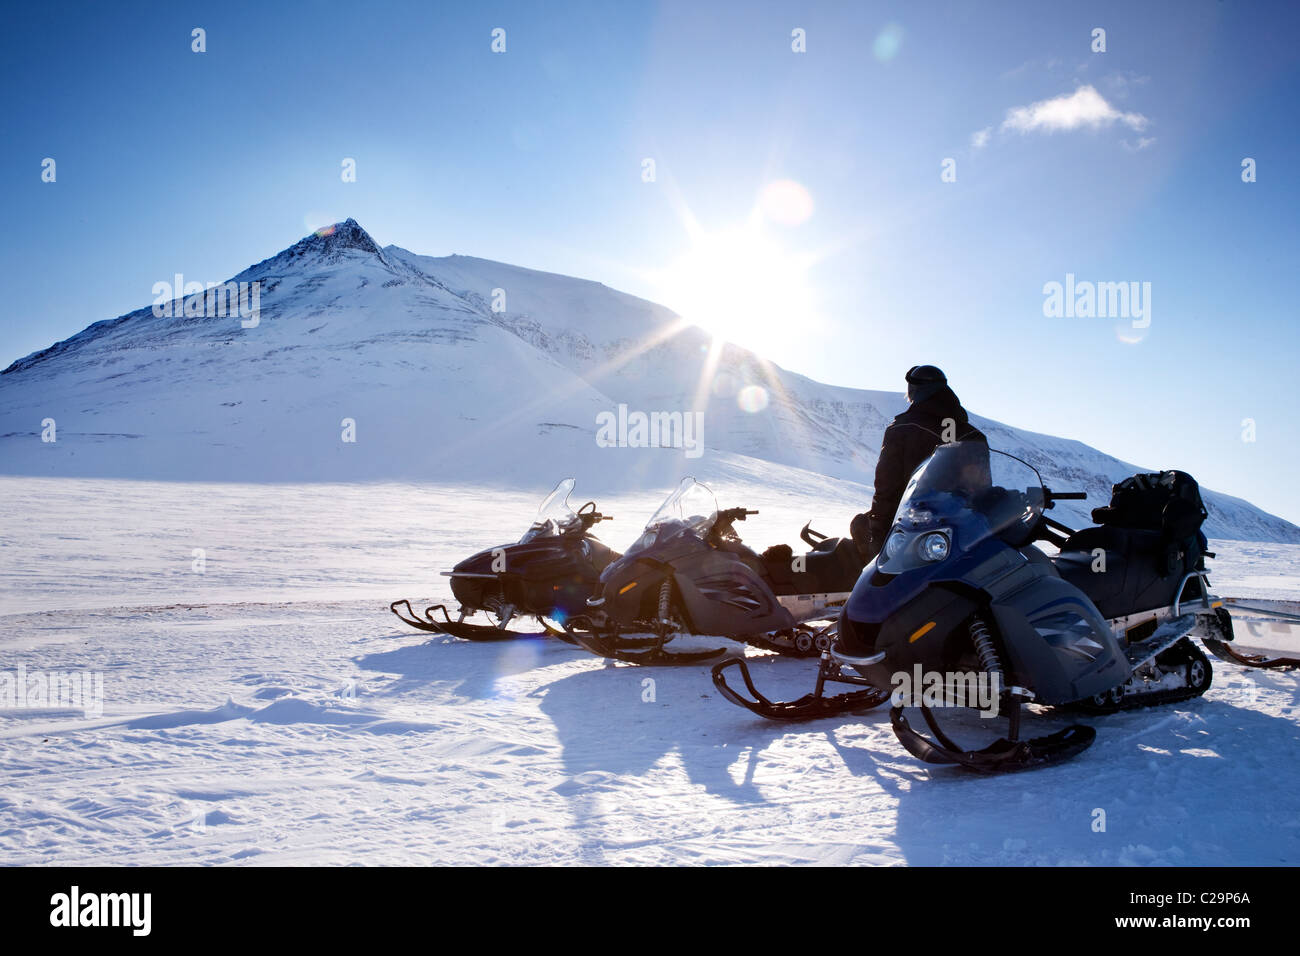 Three snowmobiles and a winter landscape with mountain Stock Photo